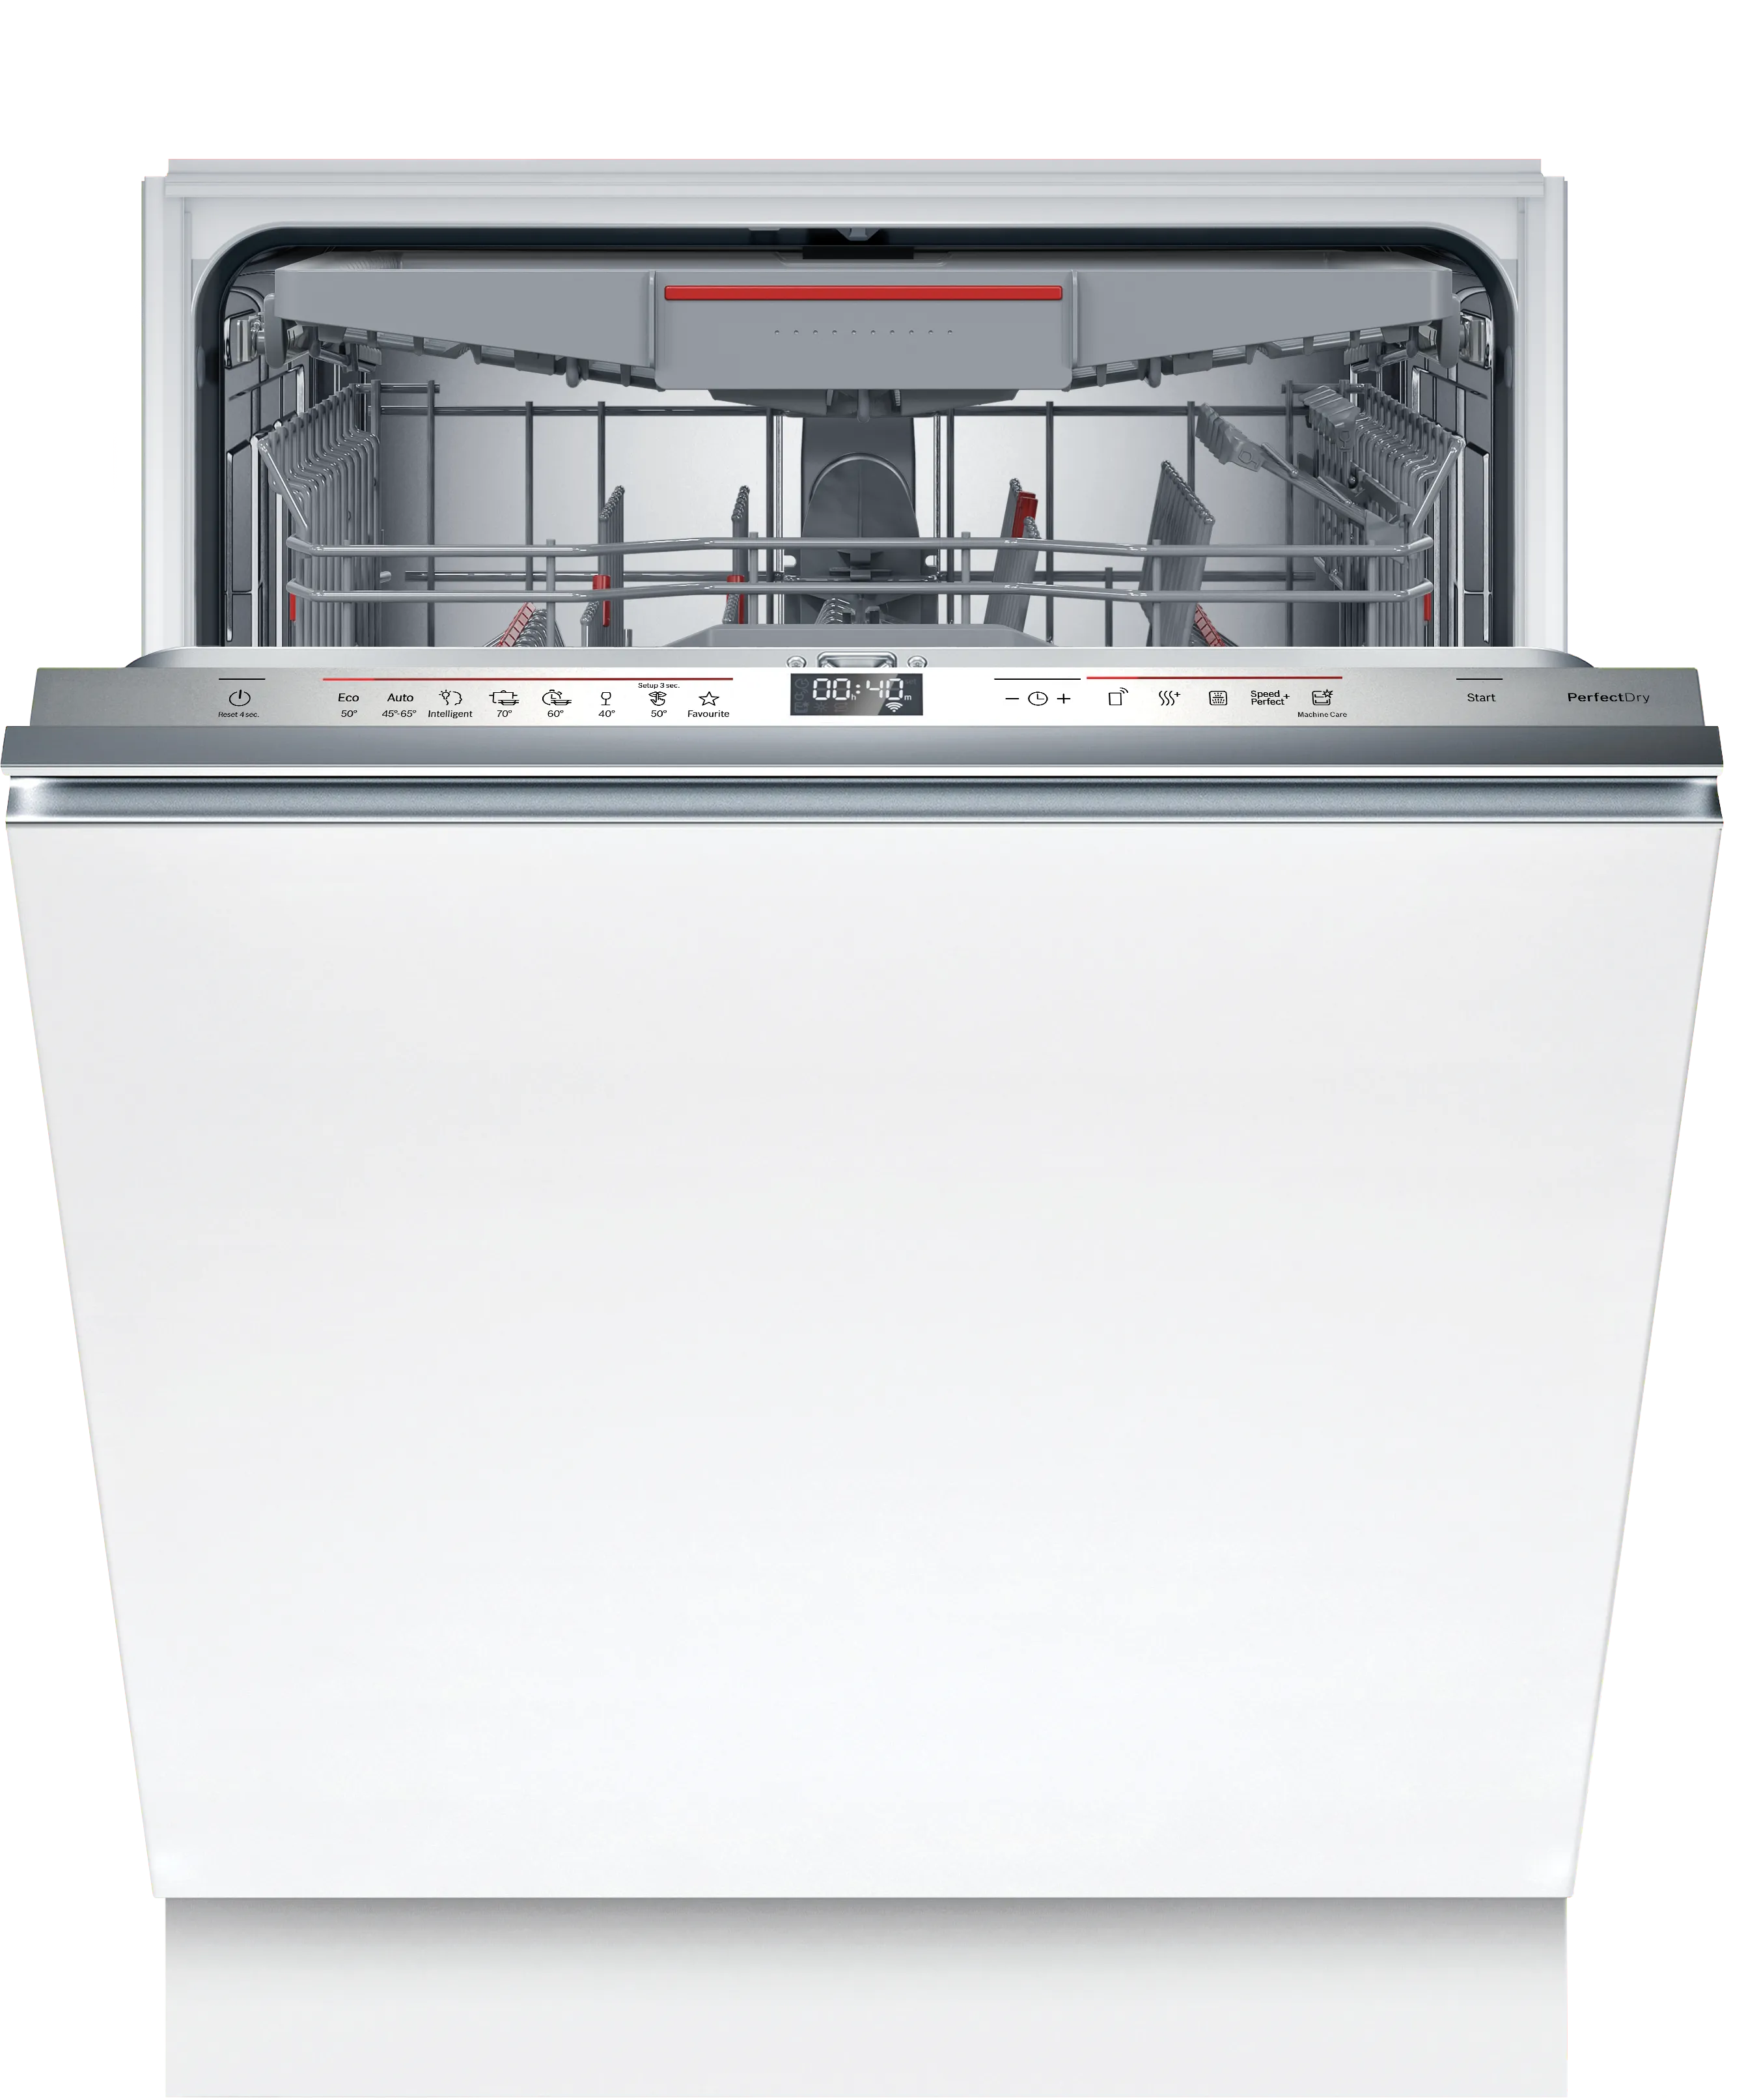 Series 6, fully-integrated dishwasher, 60 cm, variable hinge for special installation situations, smh6zcx06e